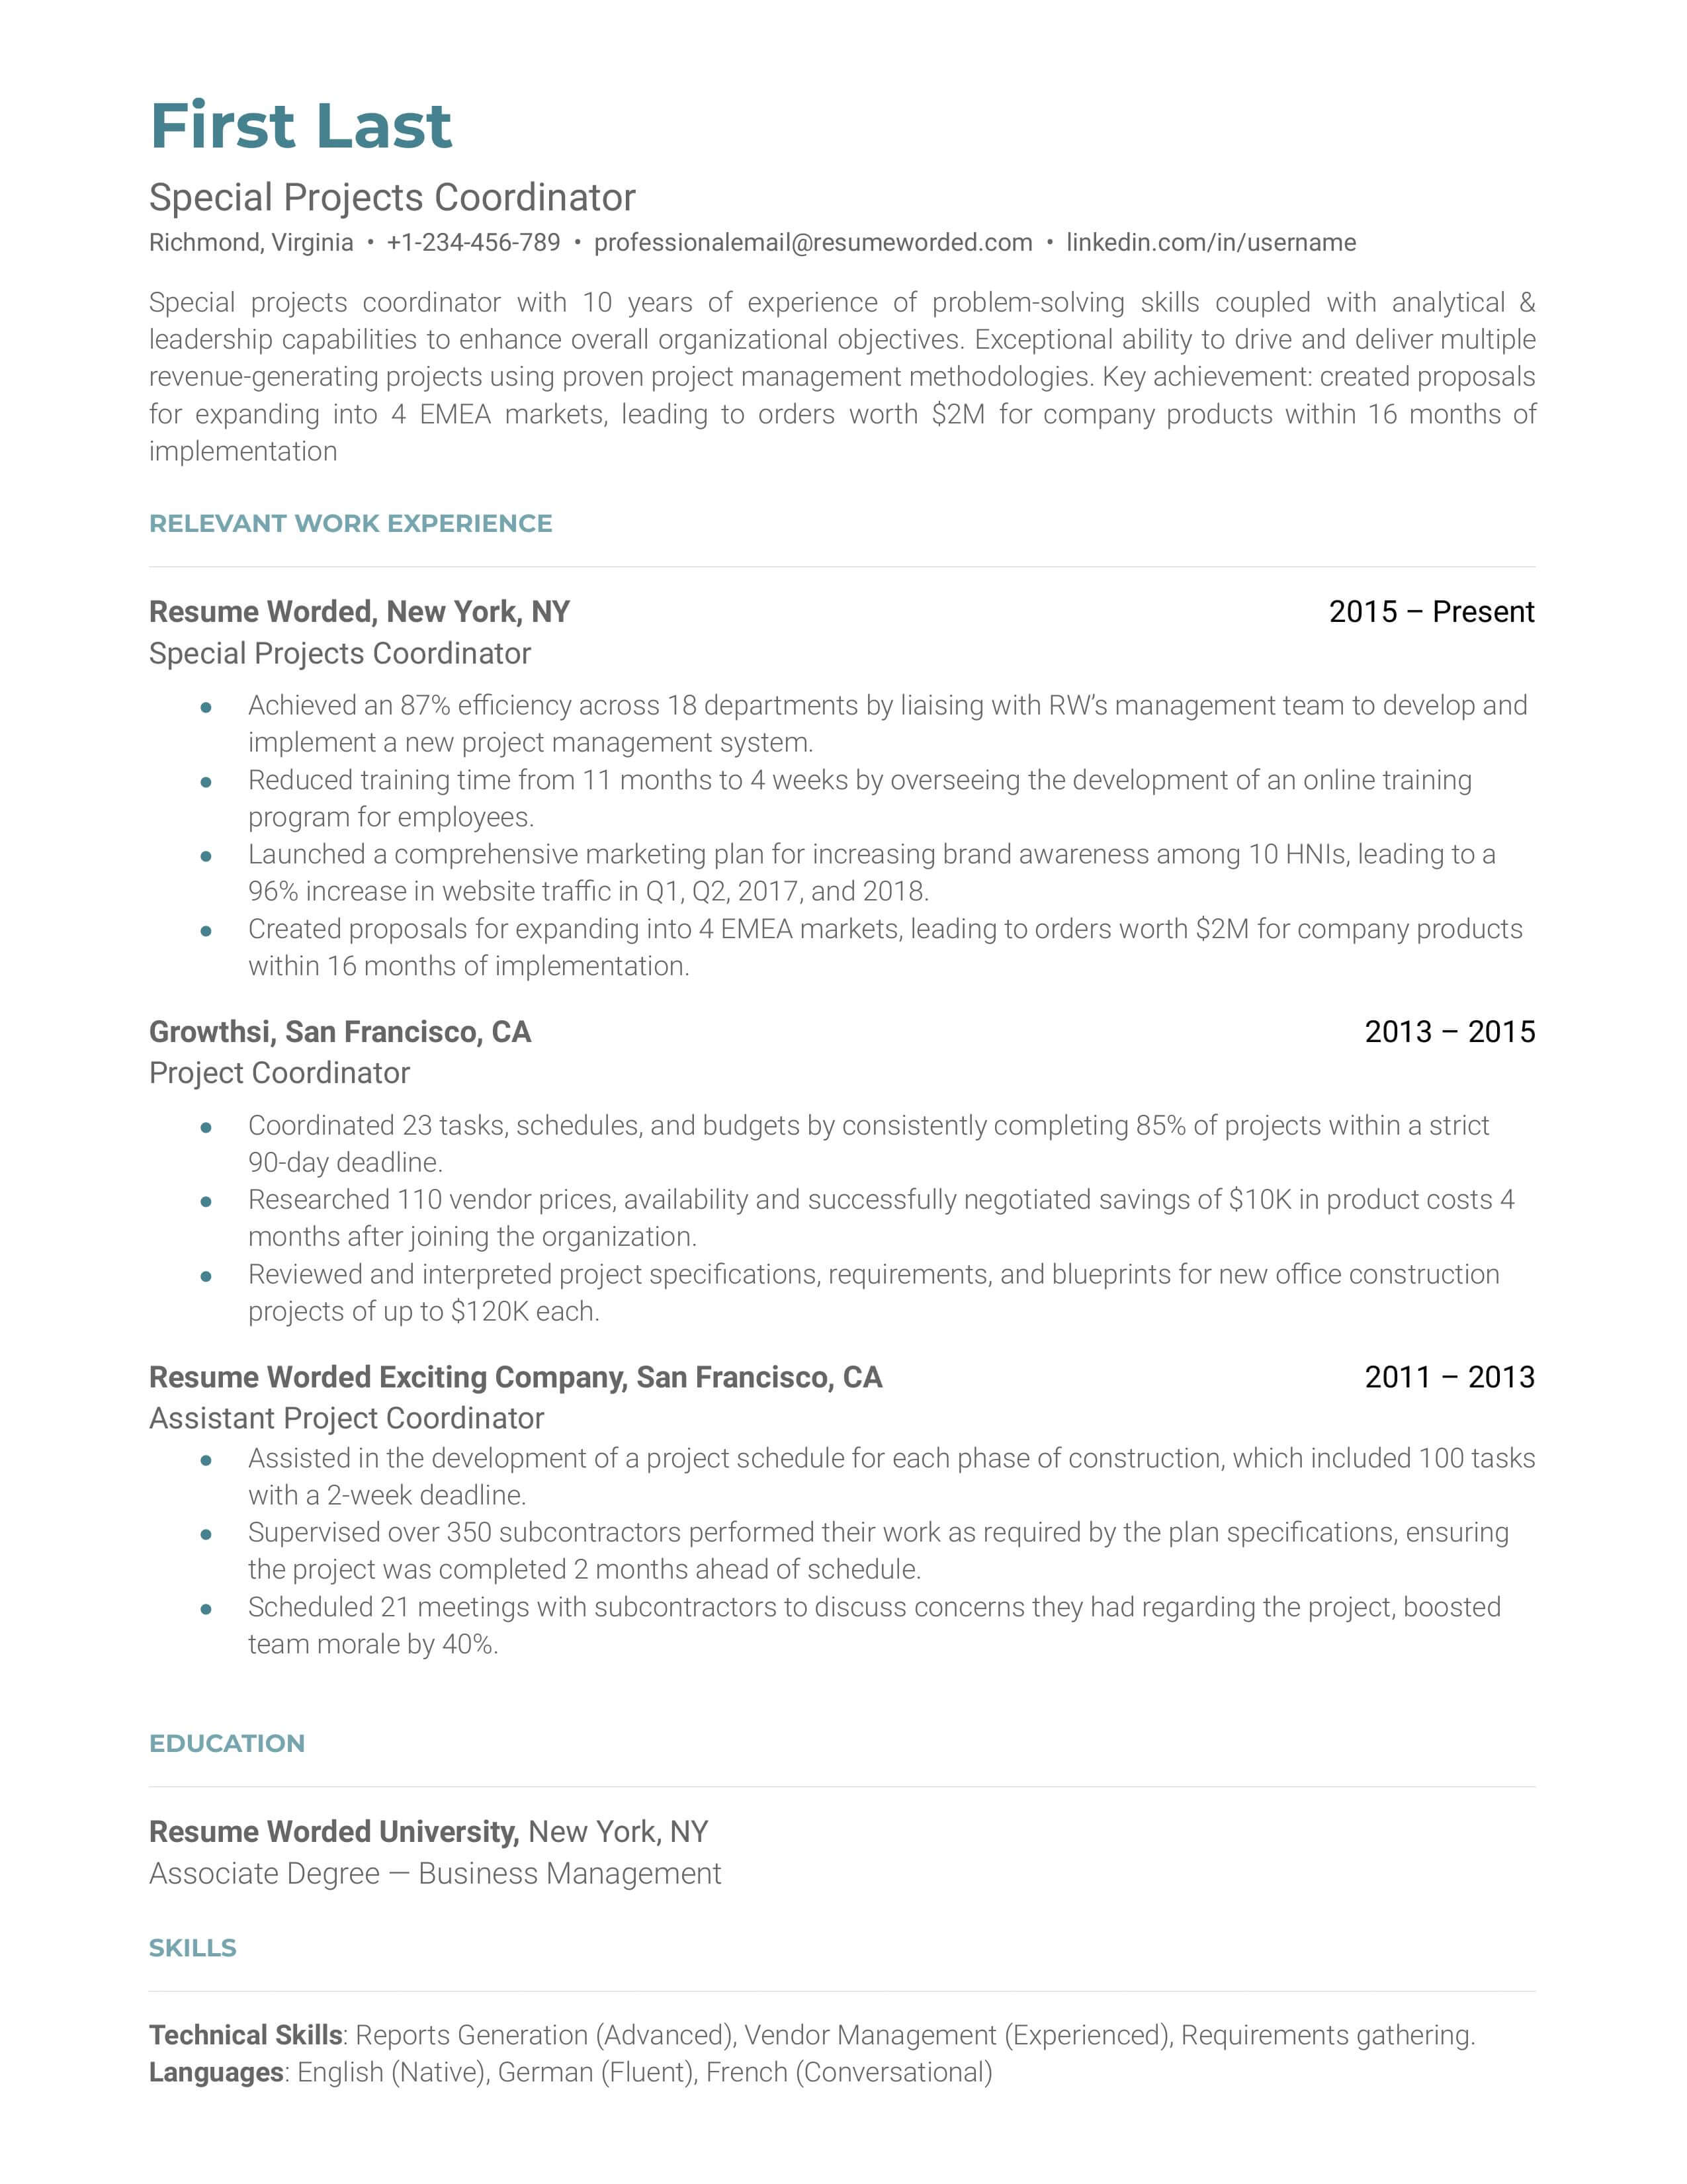 A special project coordinator resume template that highlights a profile description, contact information, and relevant work experience. 